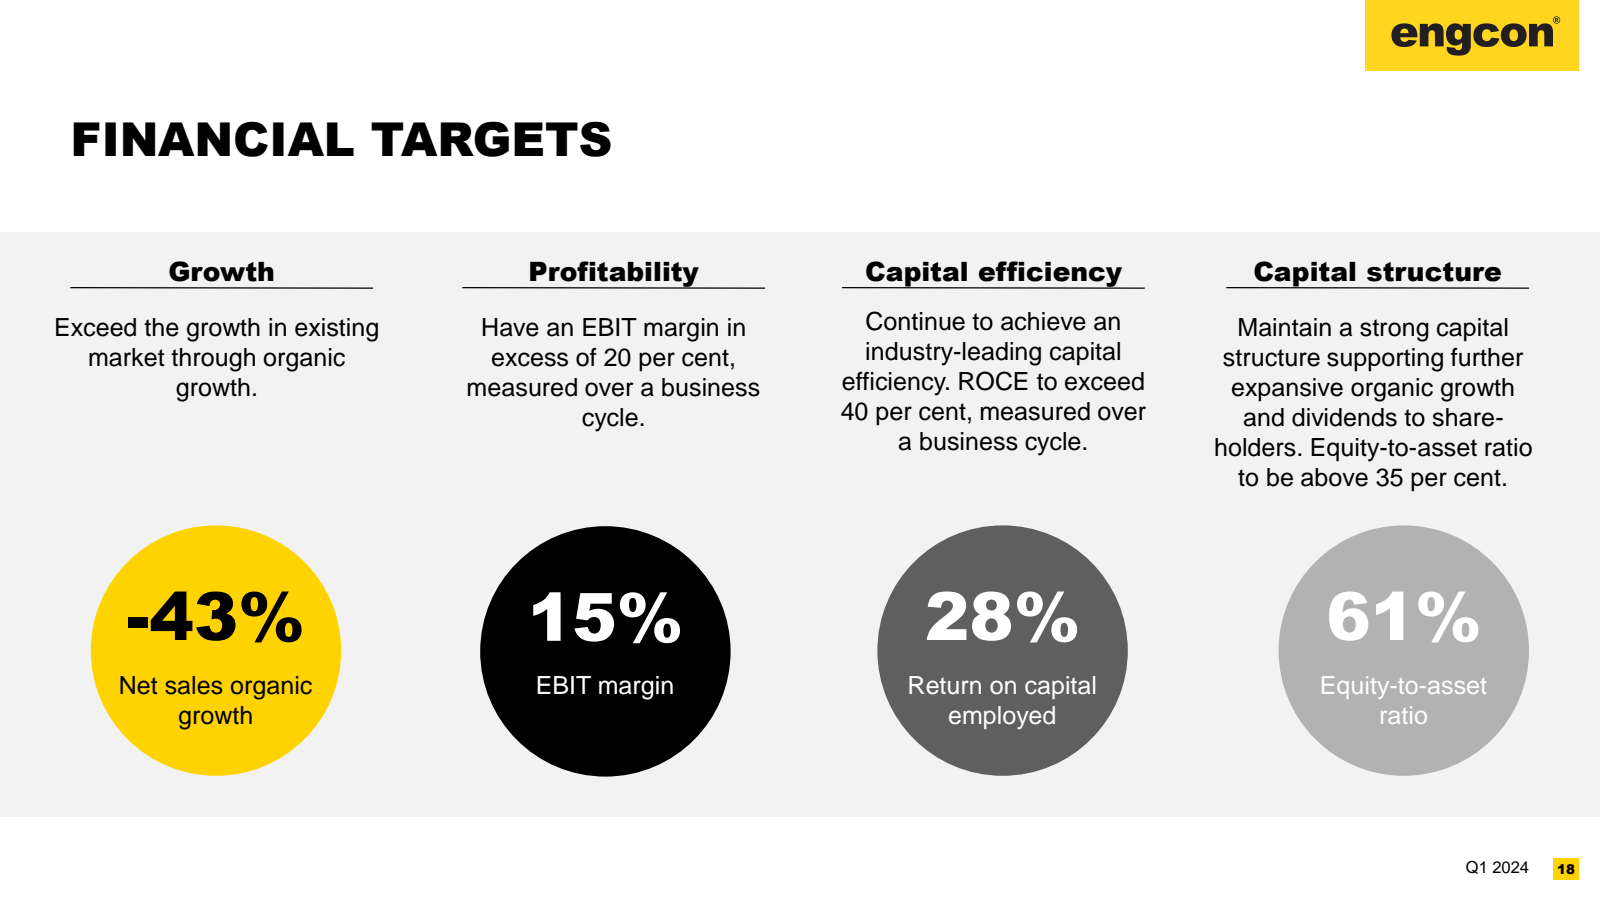 FINANCIAL TARGETS 

